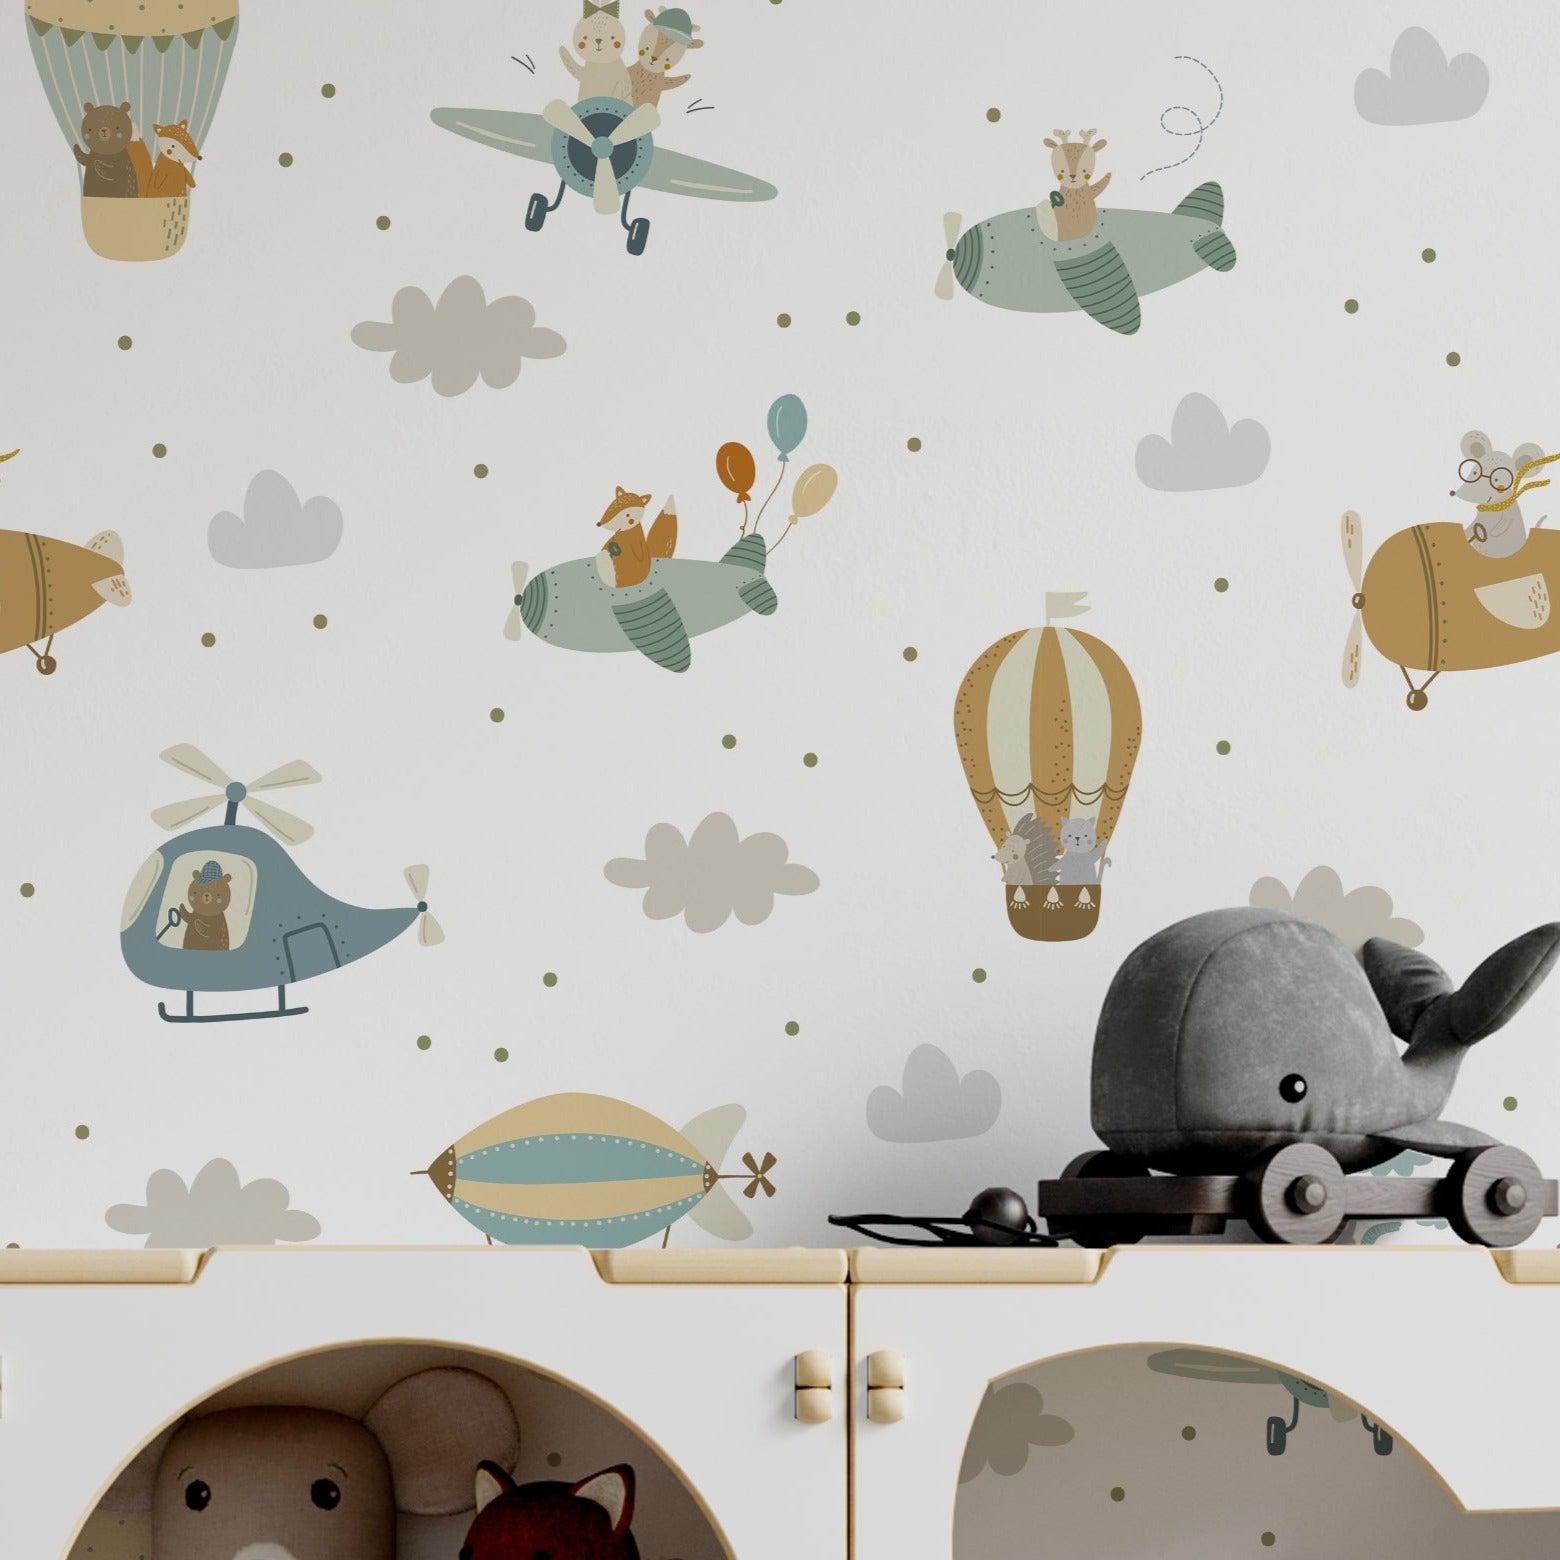 Detail of a nursery room wall covered with 'Flying Friends' wallpaper illustrating cartoon animals on airborne adventures. The playful decor includes aviation-themed elements such as hot air balloons, airplanes, and helicopters with animals as pilots amid clouds and stars.